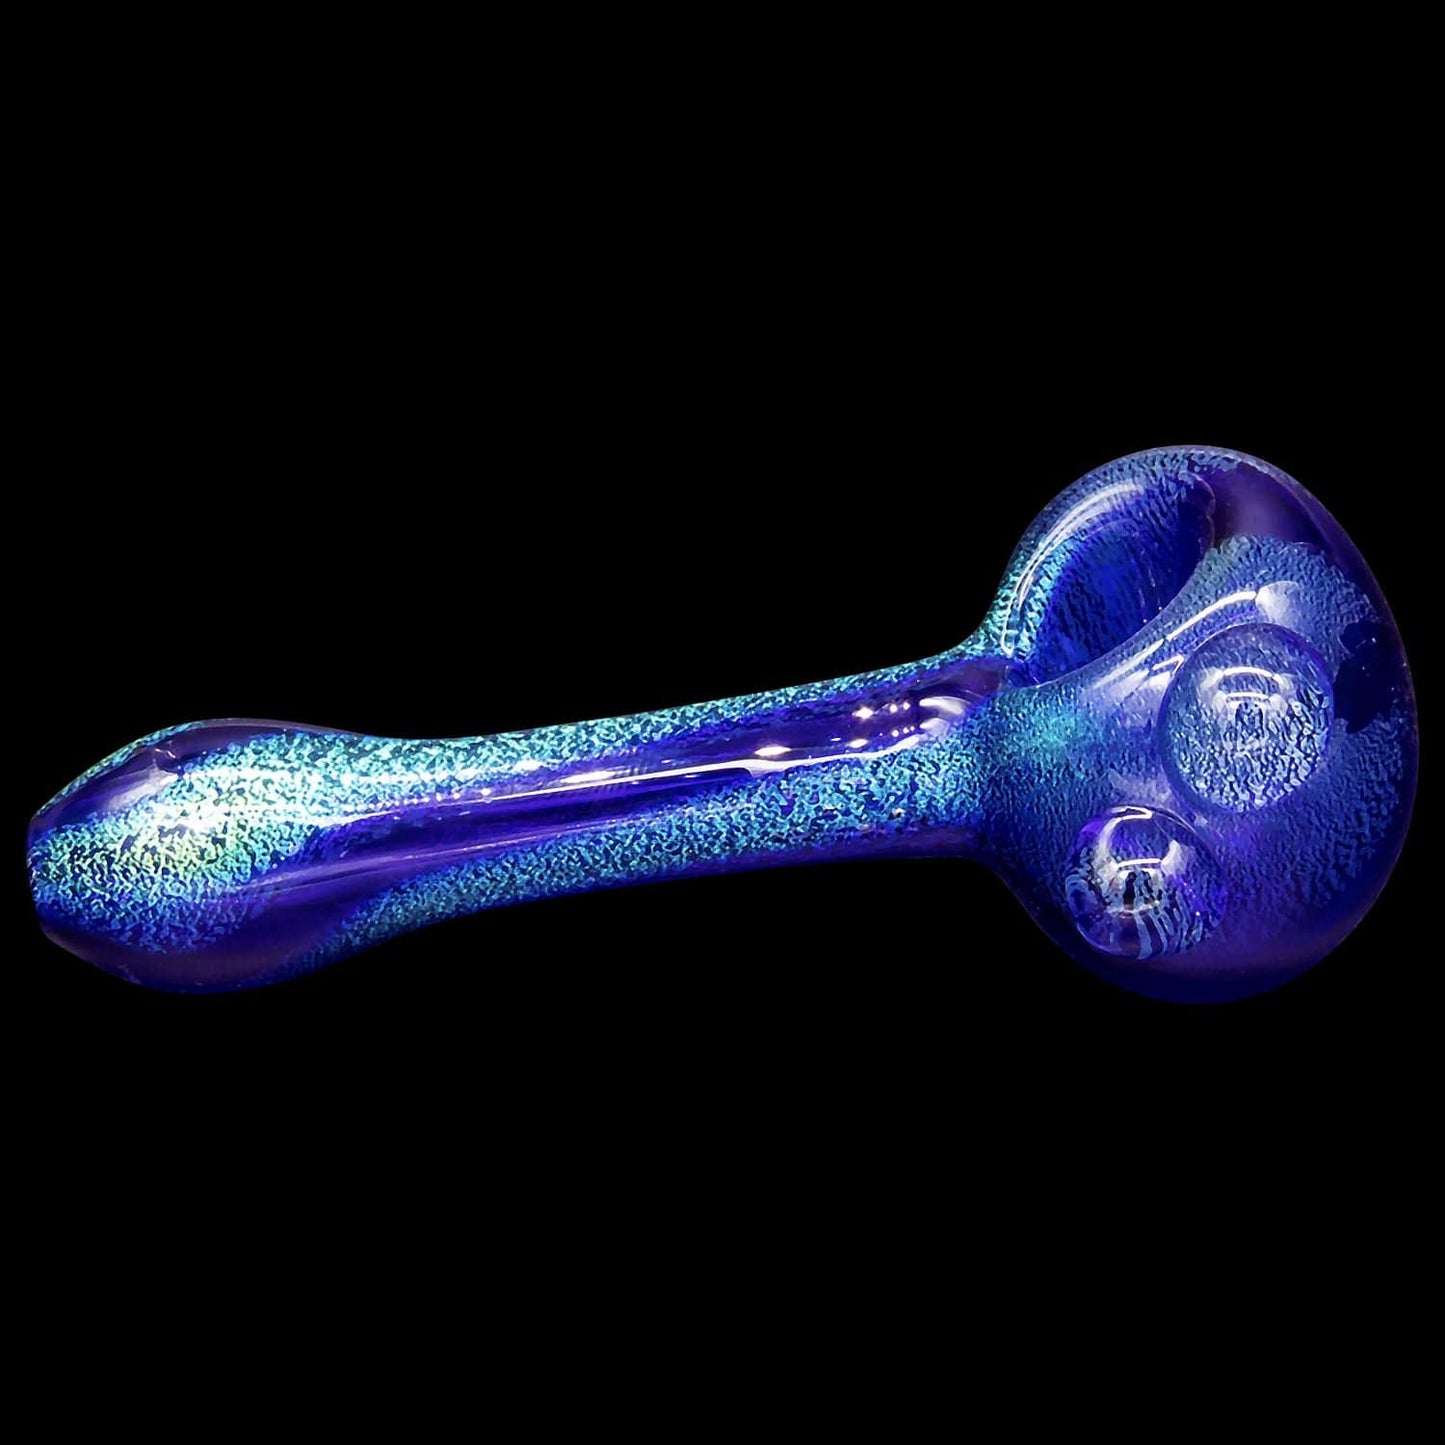 LA Pipes Hand Pipe "Galactic Storm" Full Dichro Spoon Hand Pipe